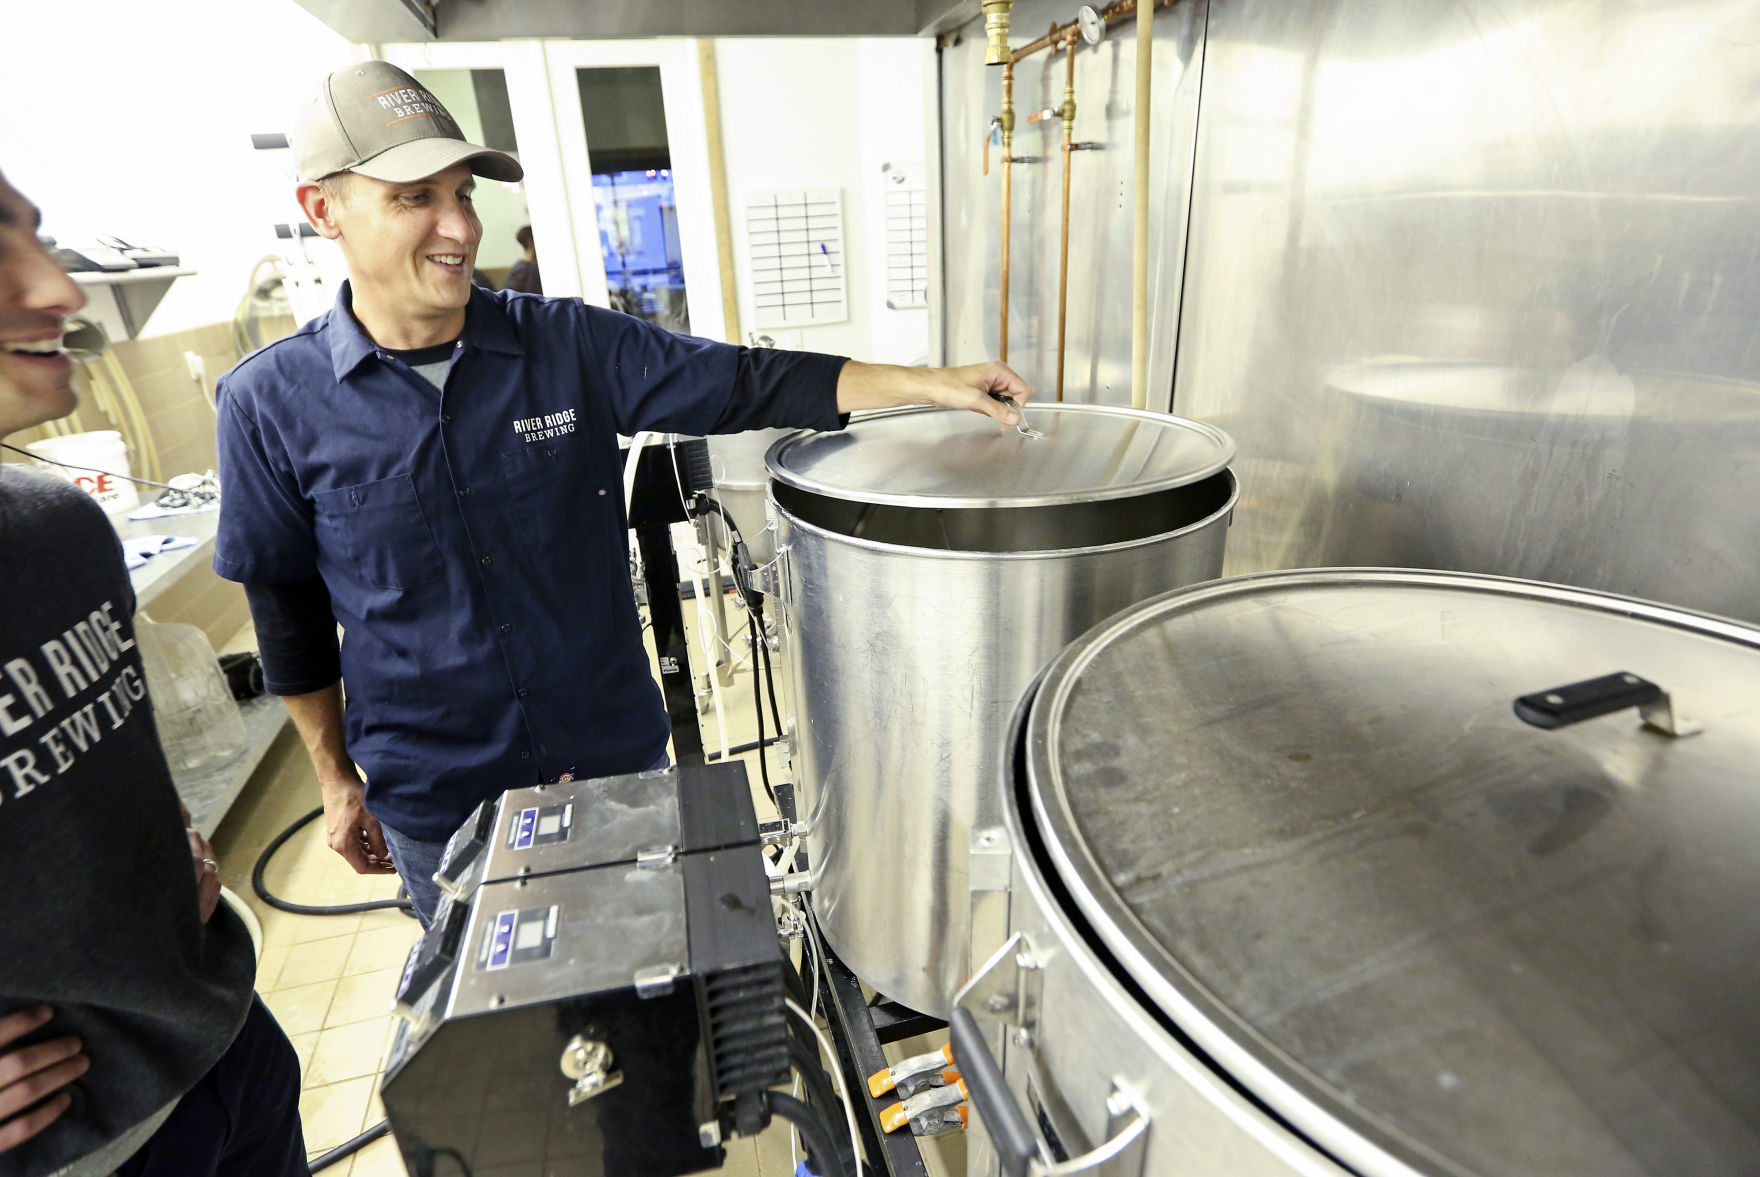 Co-owner Nick Hueneke check on grains as part of the brewing process at River Ridge Brewing in Bellevue, Iowa. The business uses a one-barrel system, which is capable of brewing more than 30 gallons. The business has become a favorite among passing tourists and loyal local customers alike.    PHOTO CREDIT: NICKI KOHL